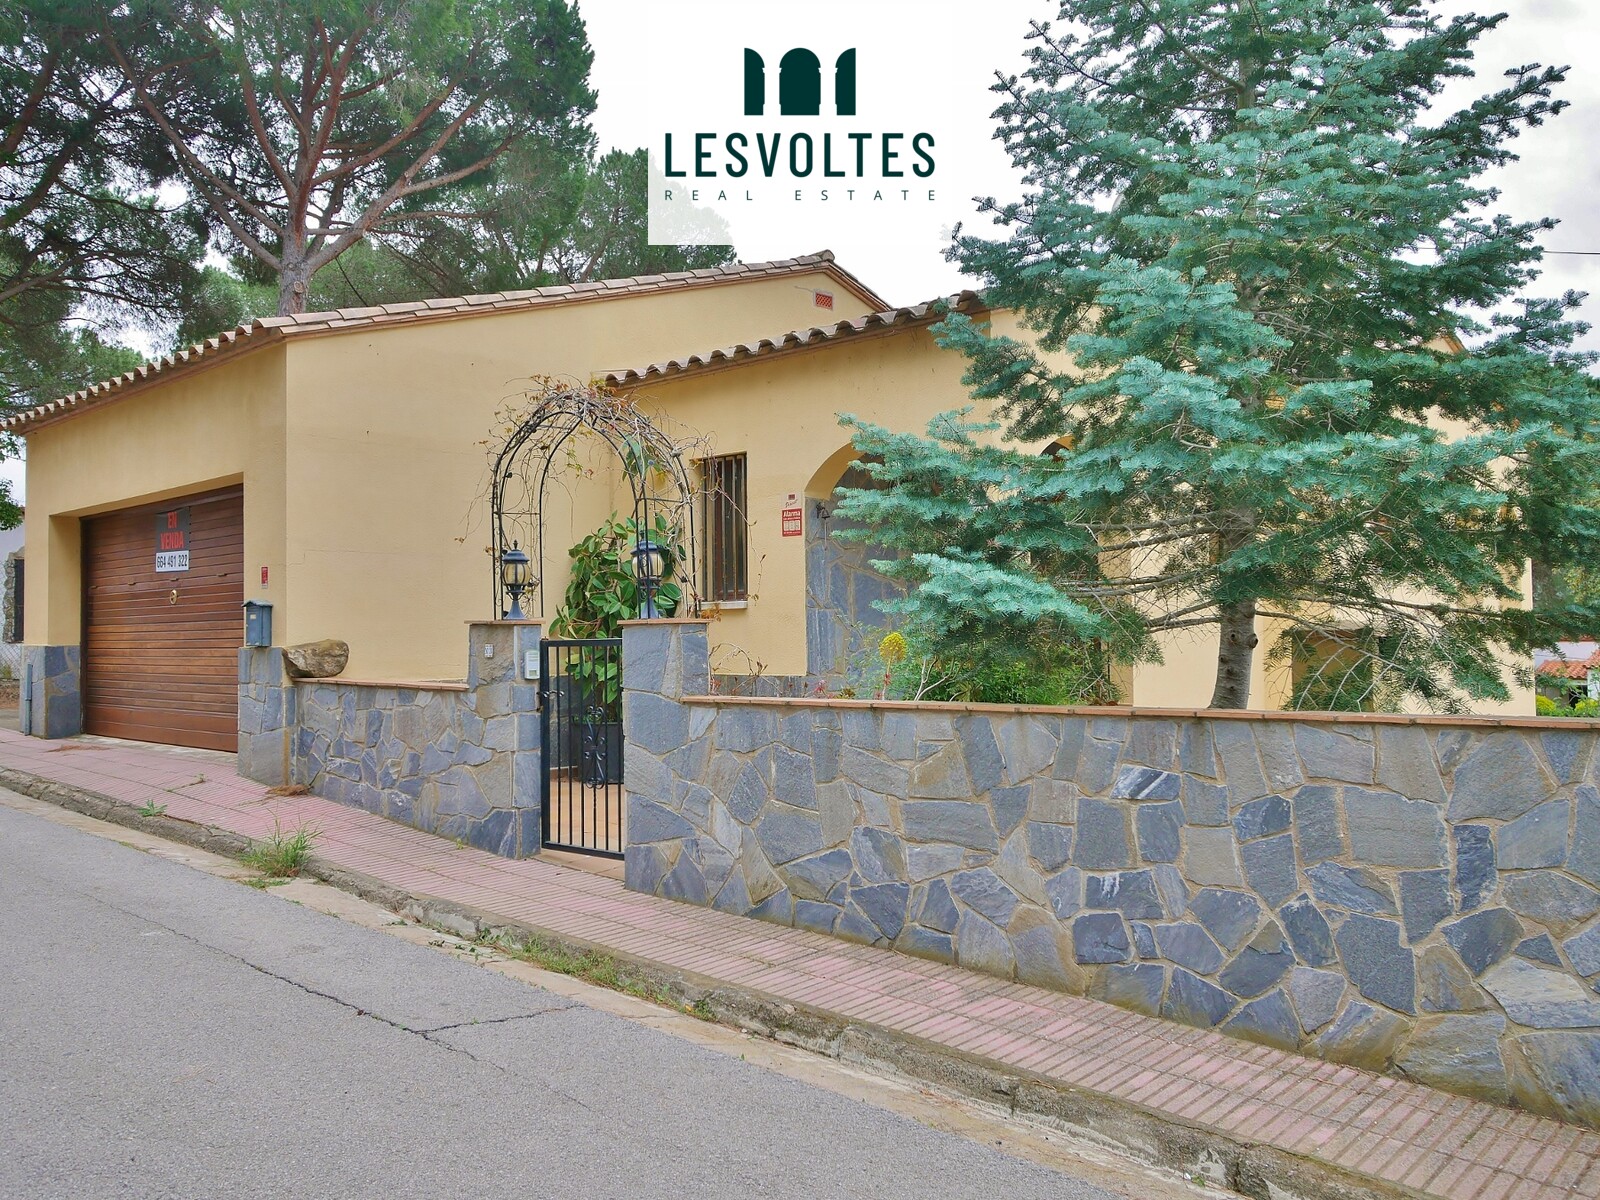 OPPORTUNITY SINGLE-FAMILY HOUSE OF 216M2 WITH GARDEN SITUATED IN A RESIDENTIAL AREA OF CALONGE